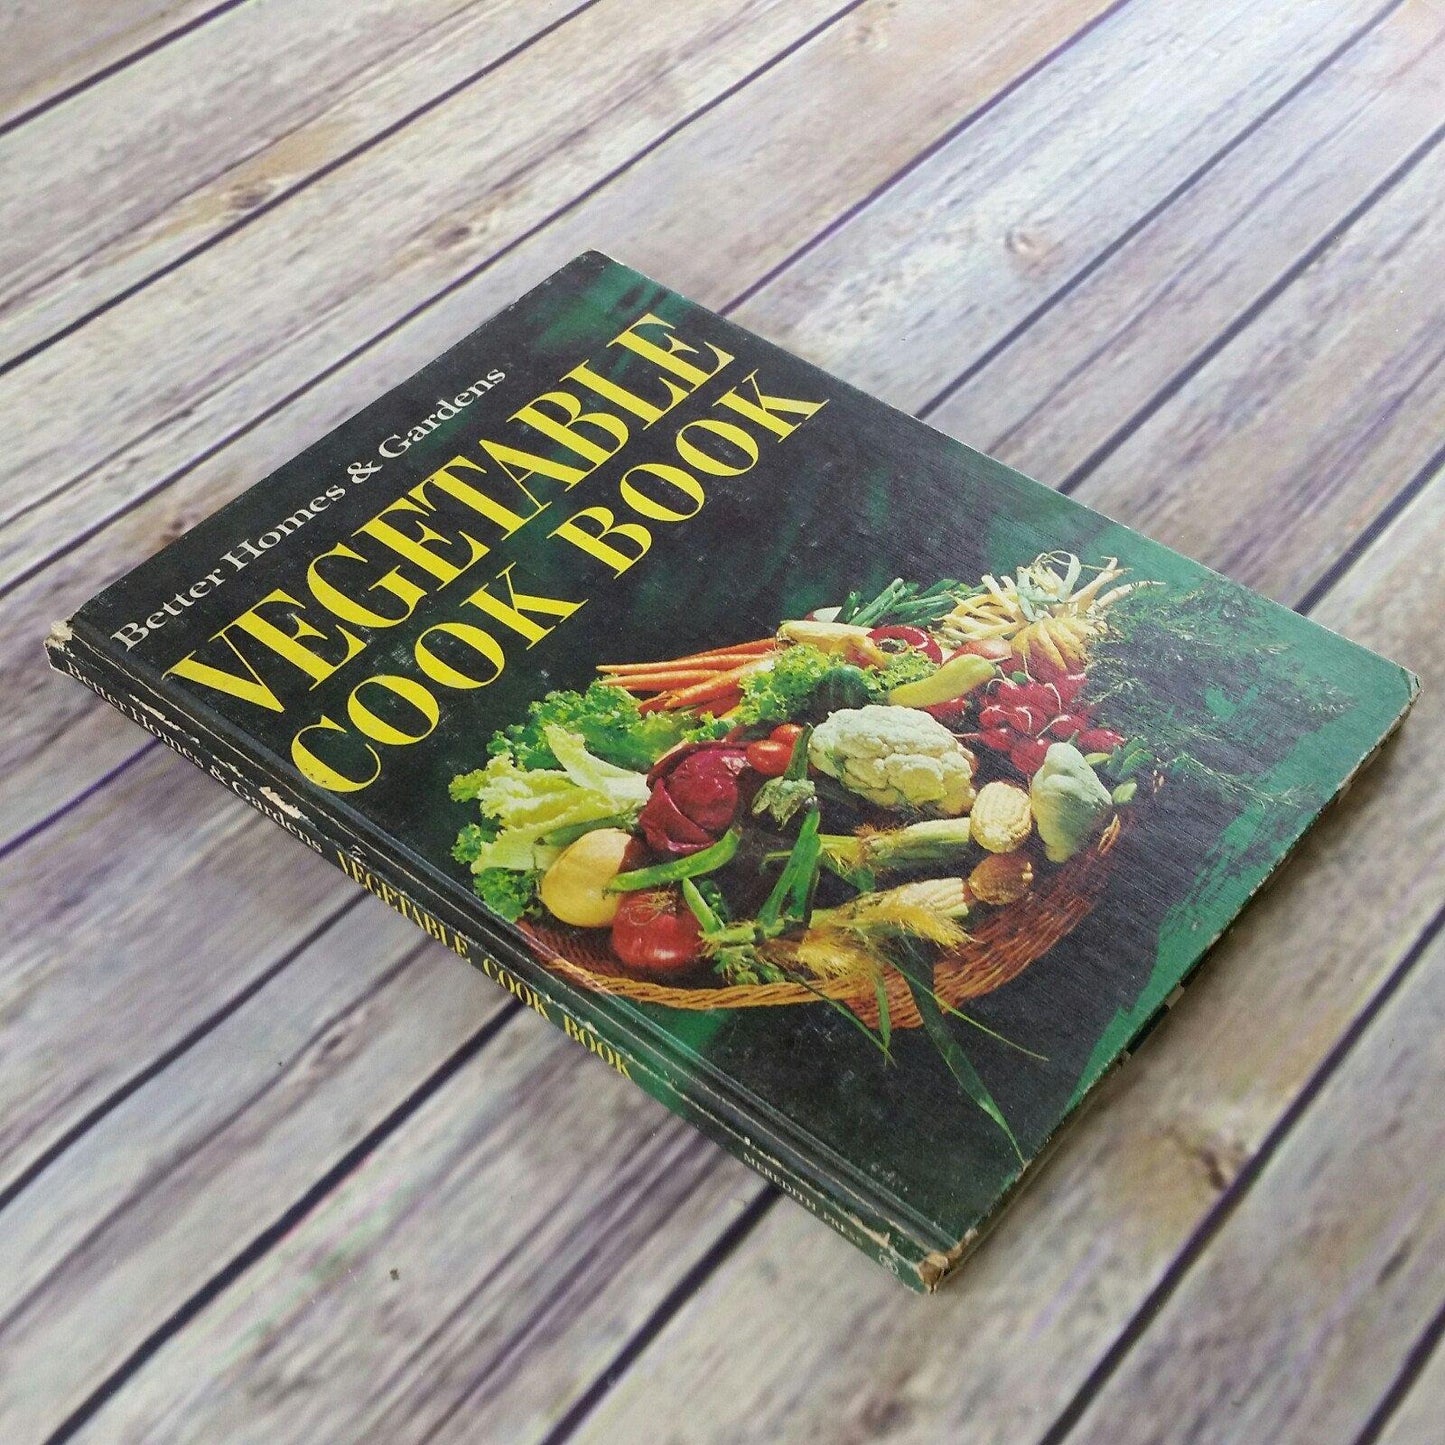 Vintage Cookbook Vegetable Recipes Better Homes and Gardens 1968 Third Printing Hardcover Canning and Freezing Soups Sauces Seasonings